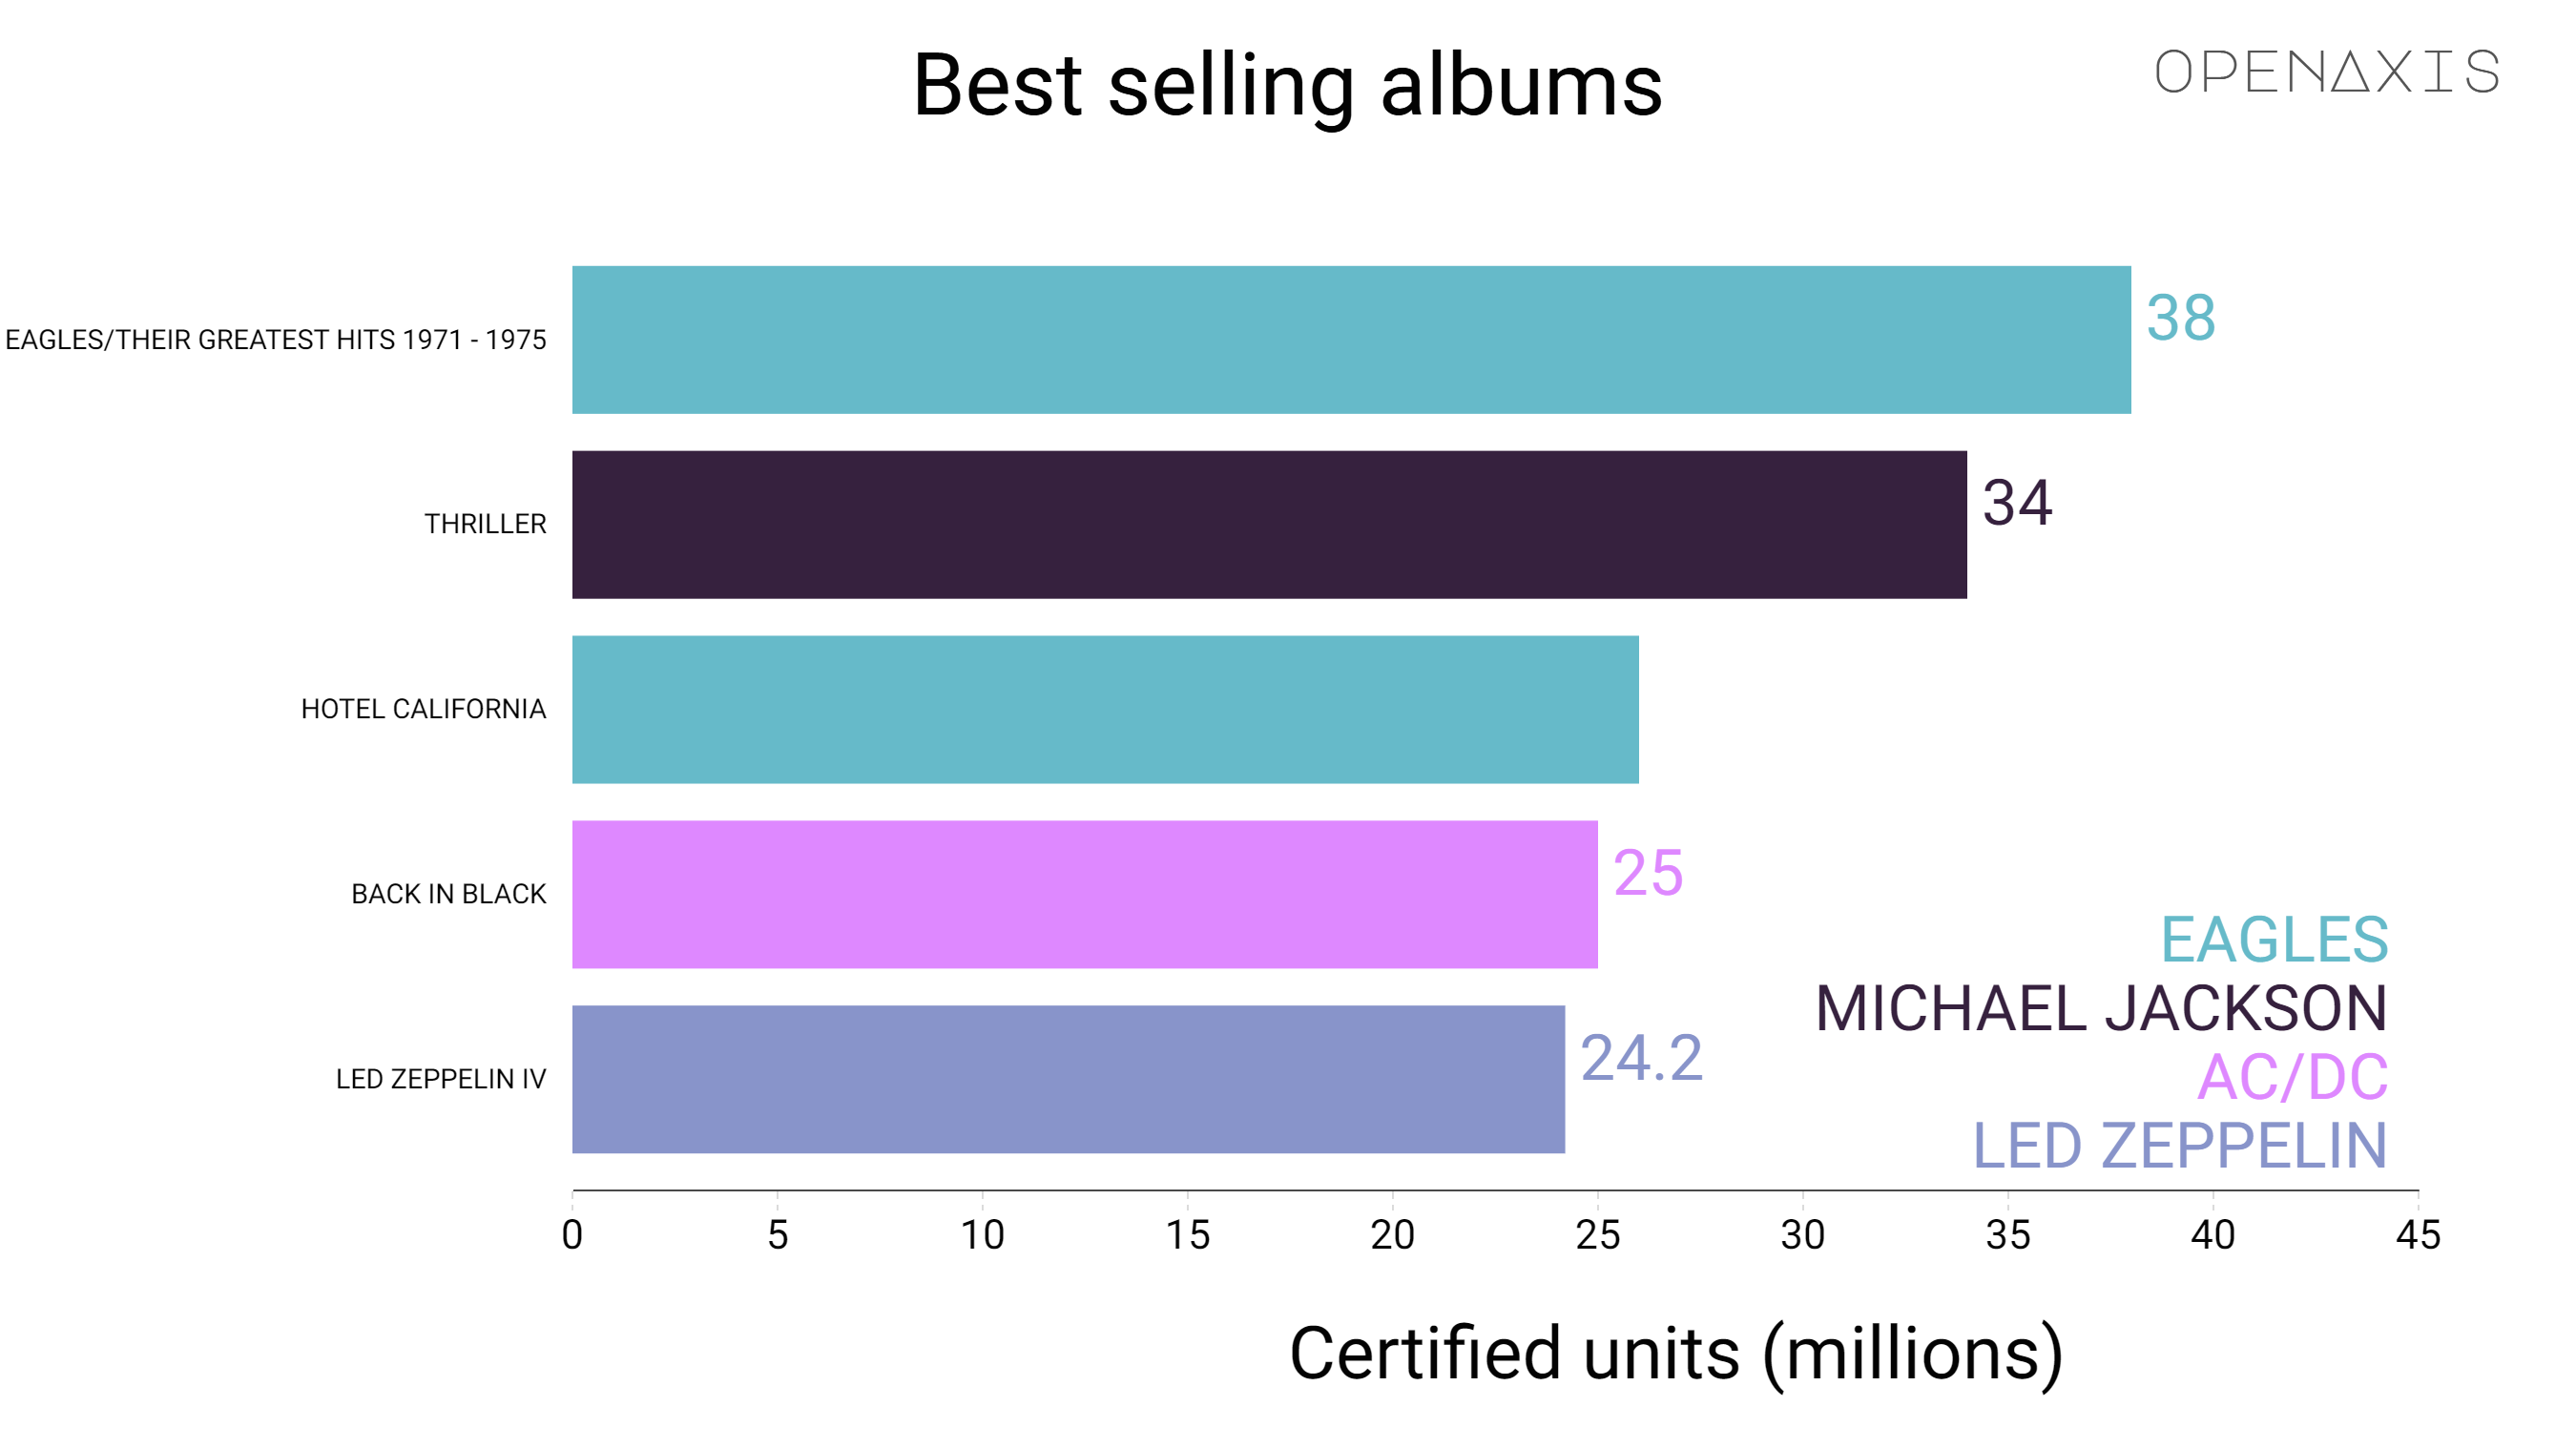 "Best selling albums"